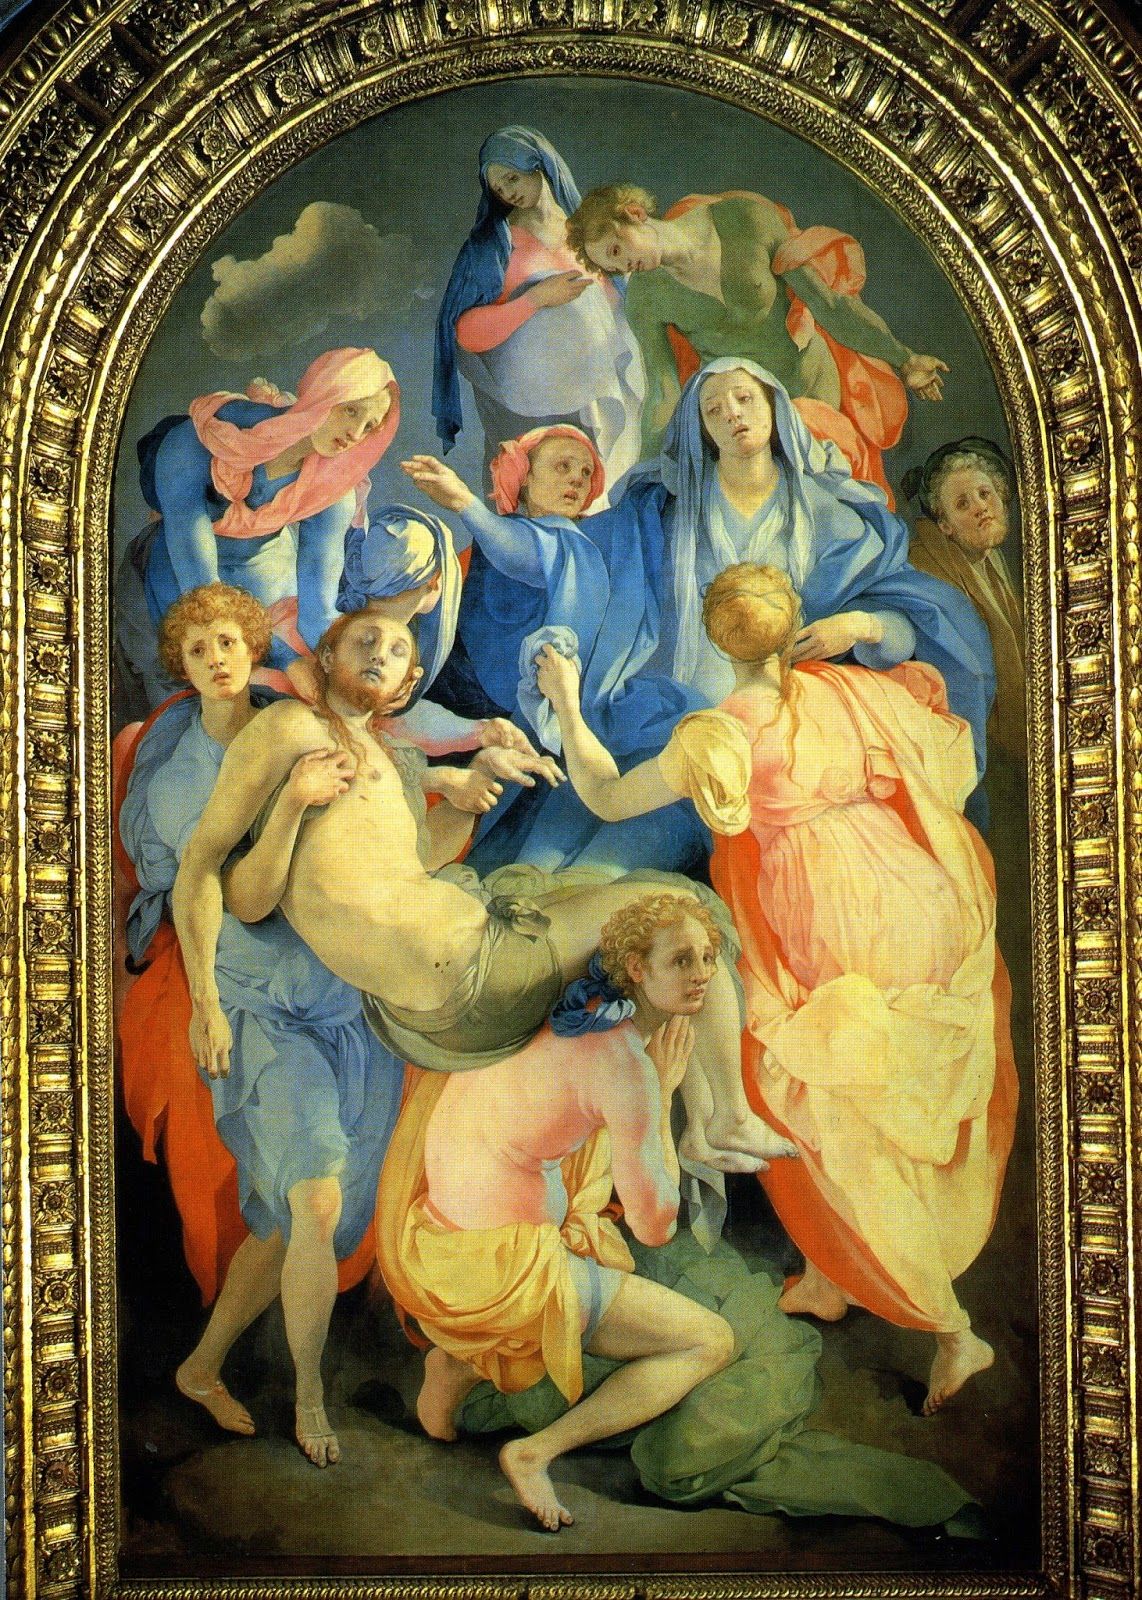 <p><strong>Entombment of Christ</strong></p><p>Jacopo da Pontormo</p><p>Mannerism (Italy)</p><p>1525-1528</p><p>Oil on wood</p>